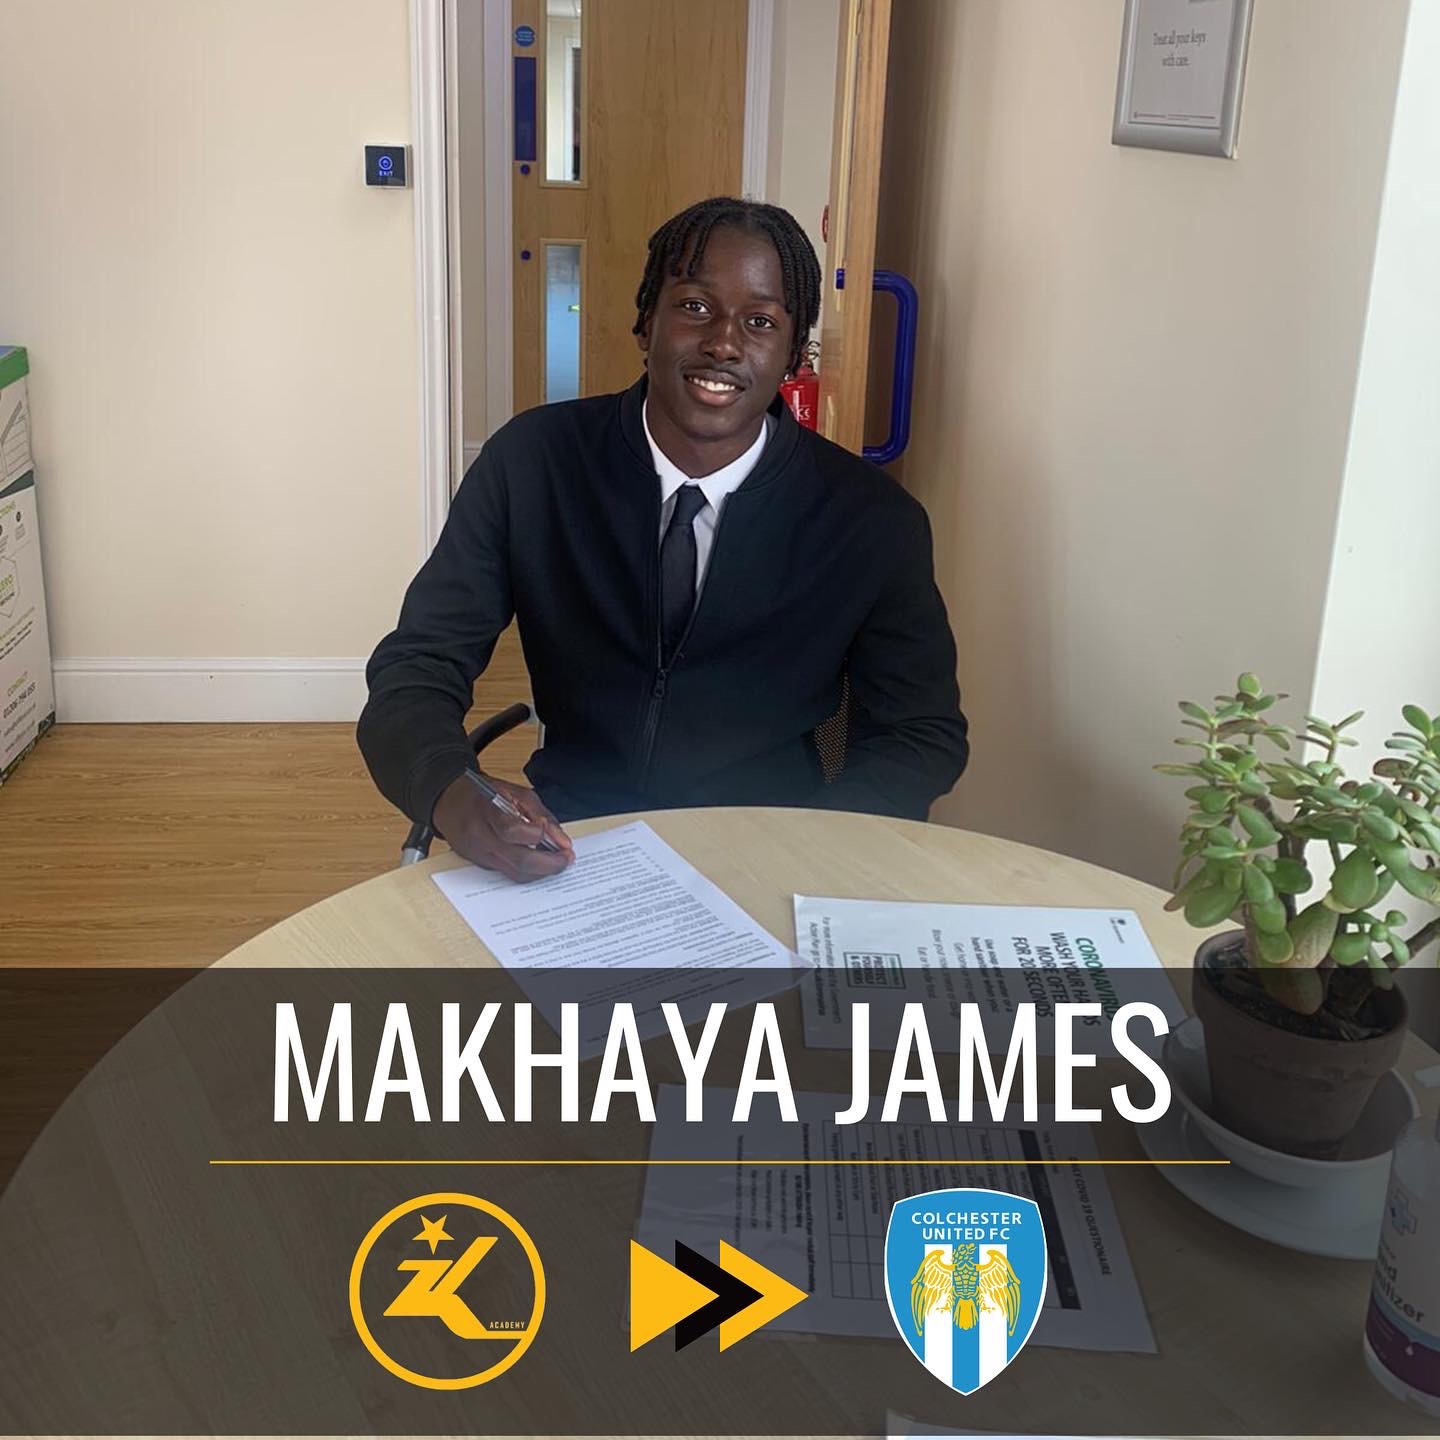 Makhaya James signs for Colchester United FC